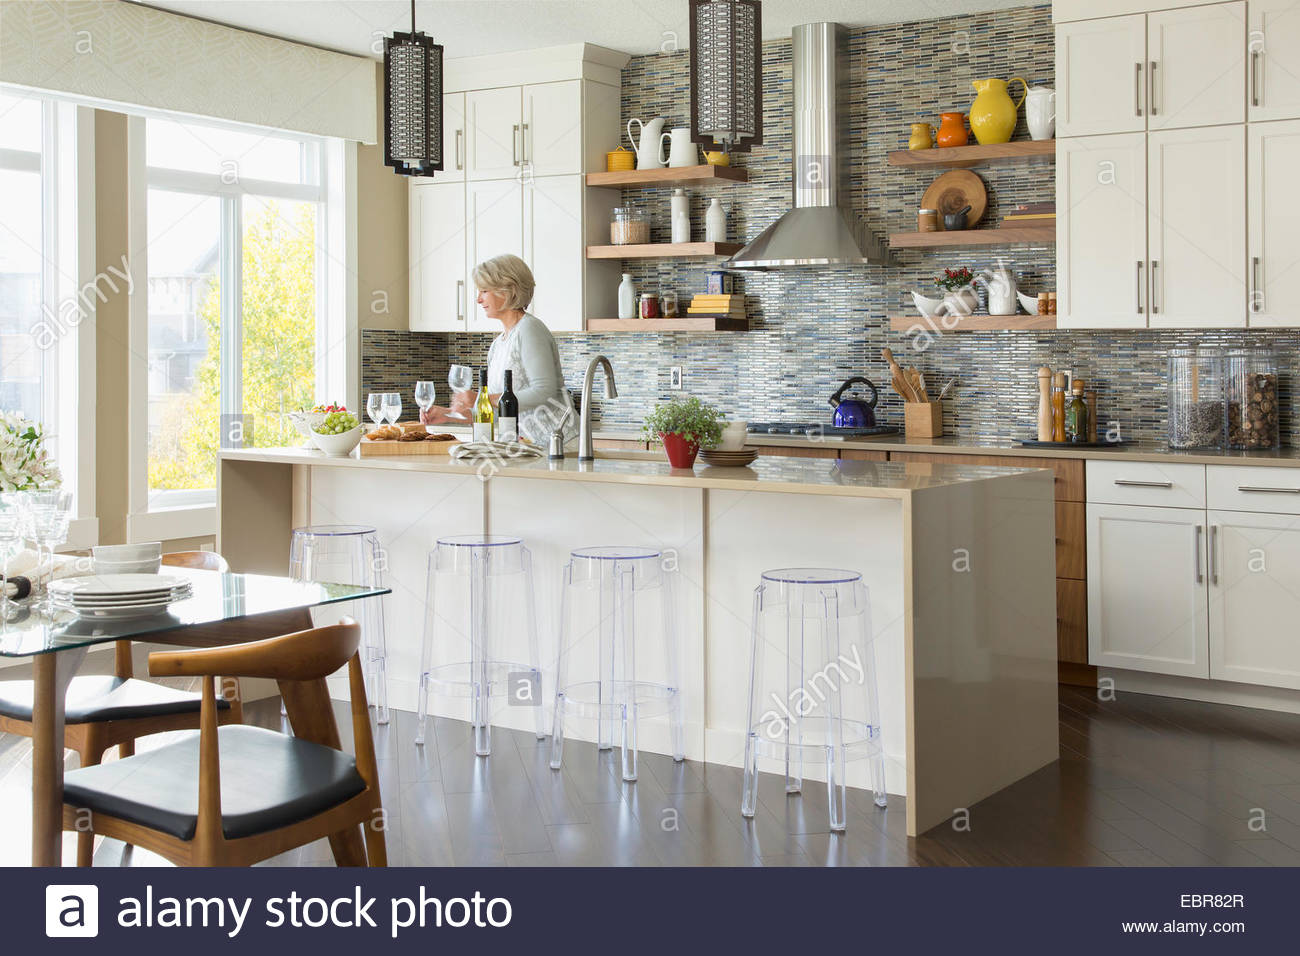 Woman with wine glasses in kitchen Stock Photo